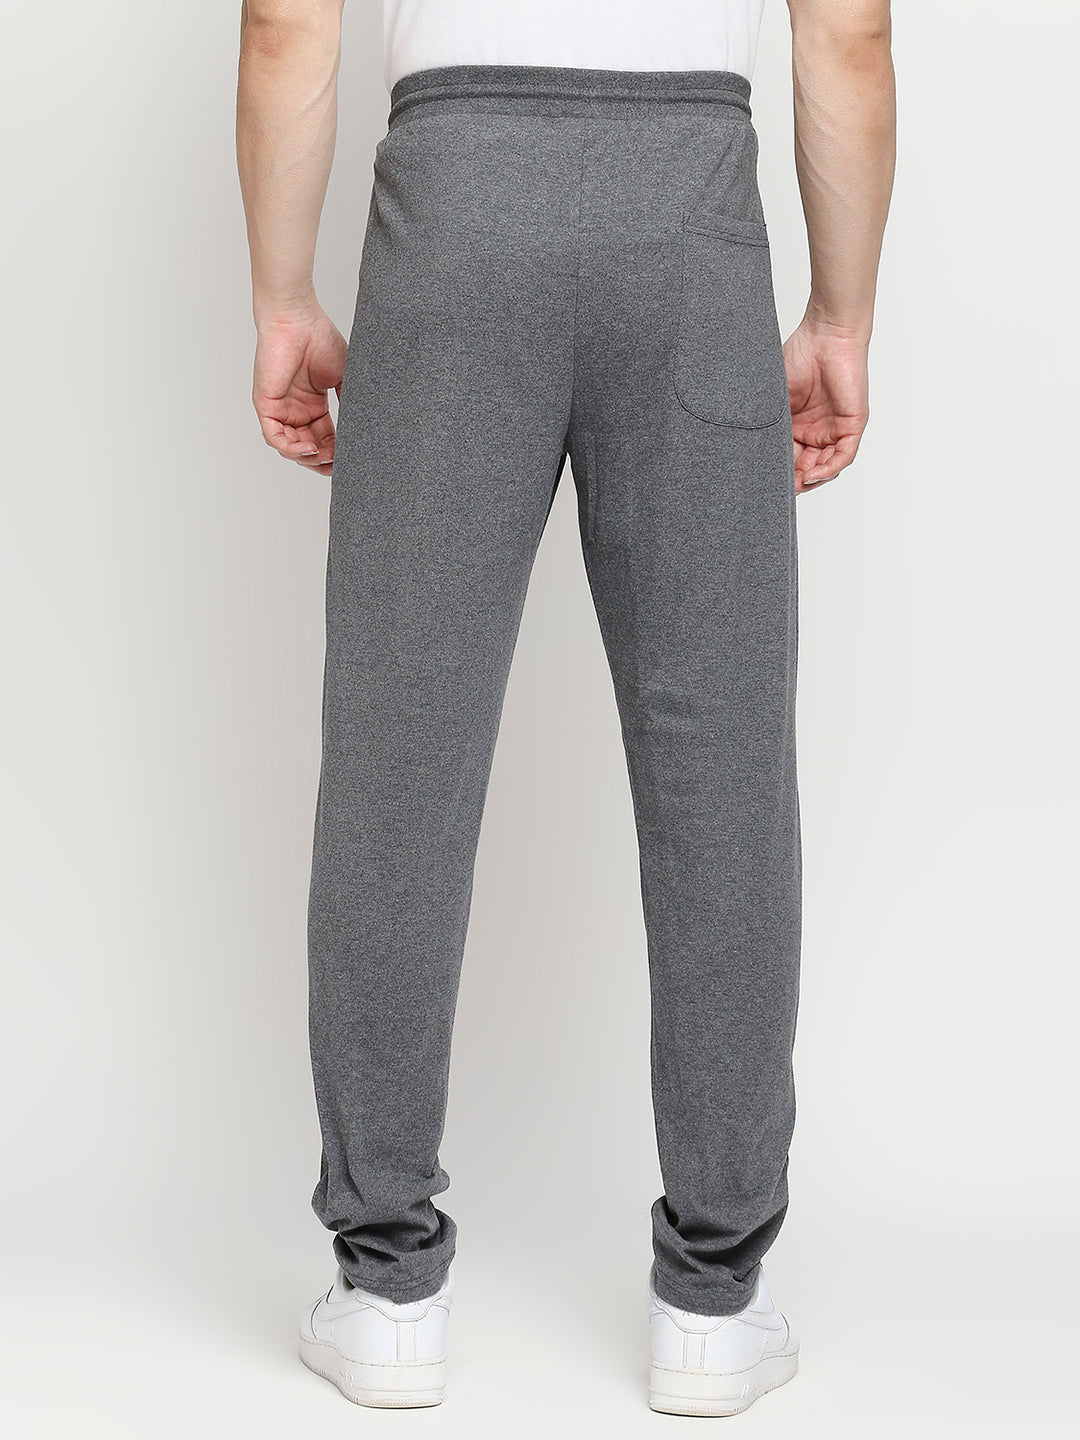 Men Cotton Blend Knitted Charcoal Trackpant- Underjeans by Spykar